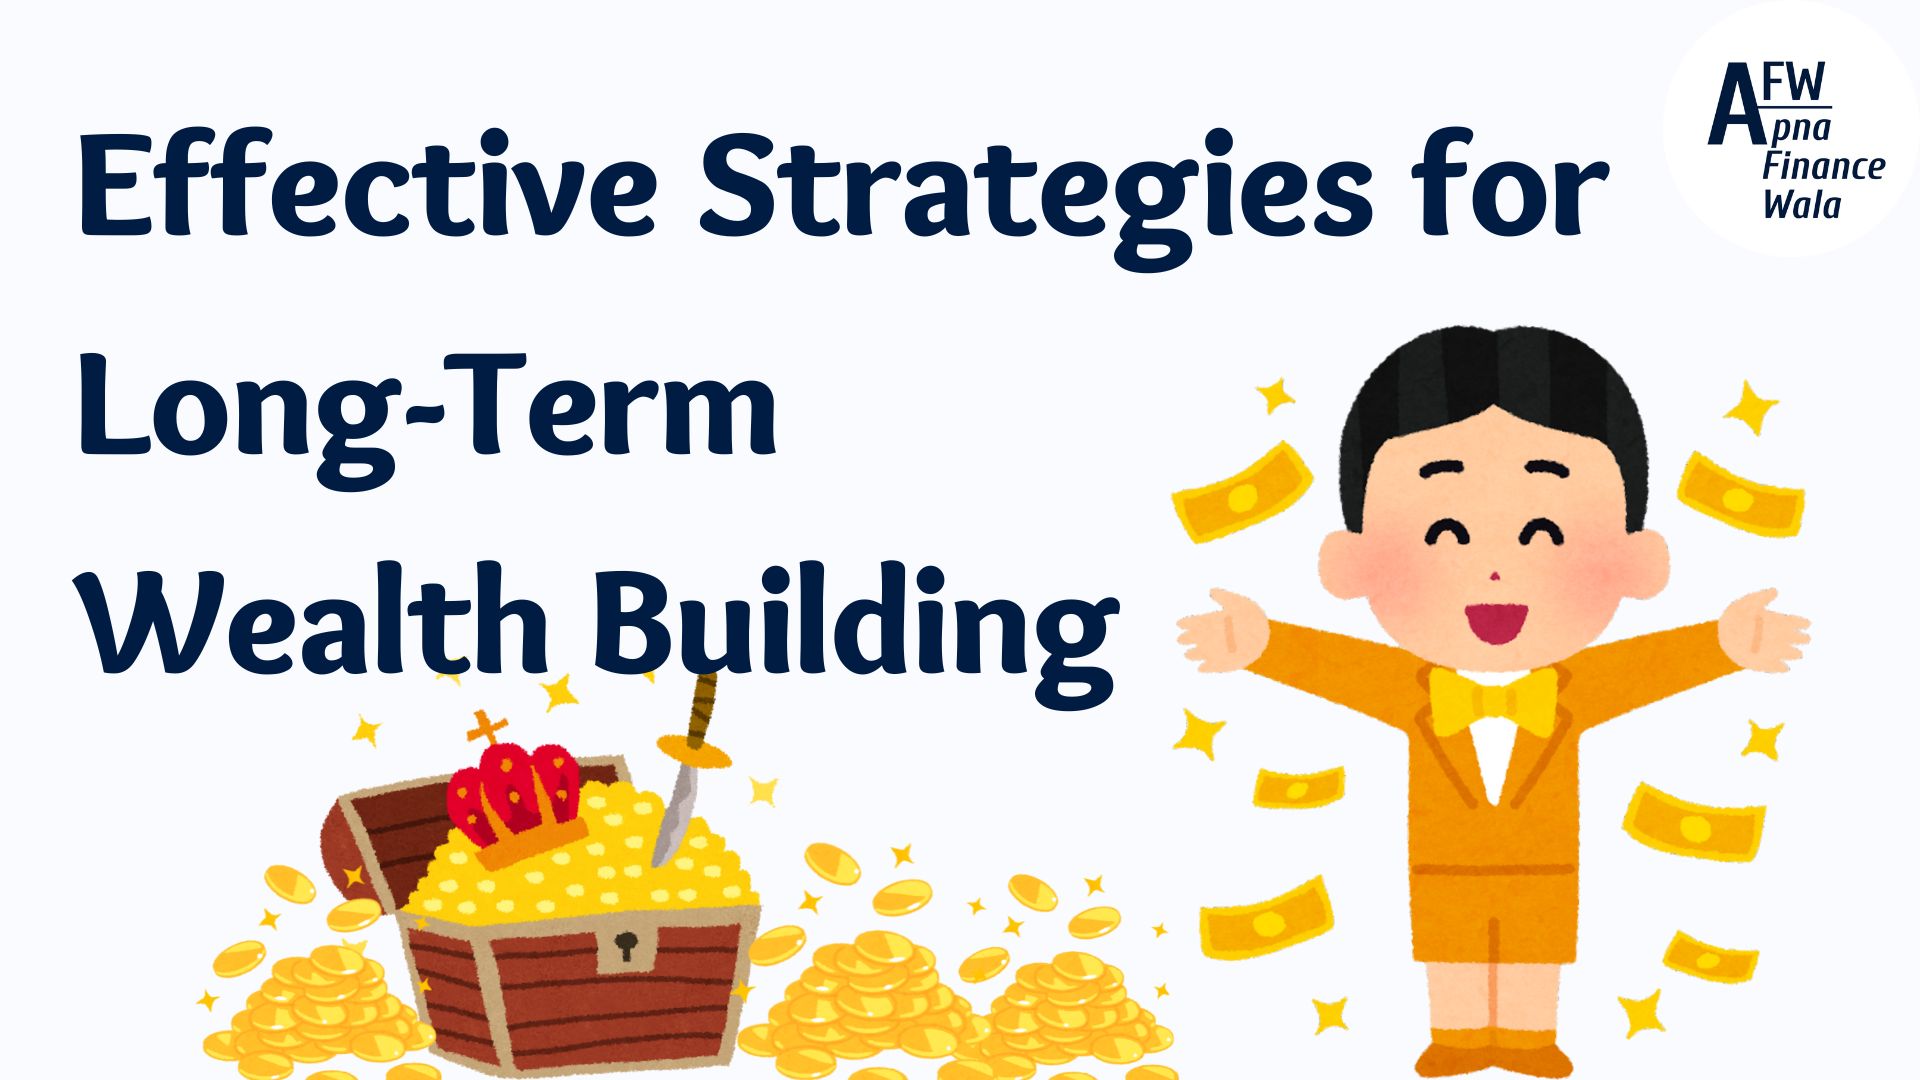 Effective Strategies for Long-Term Wealth Building